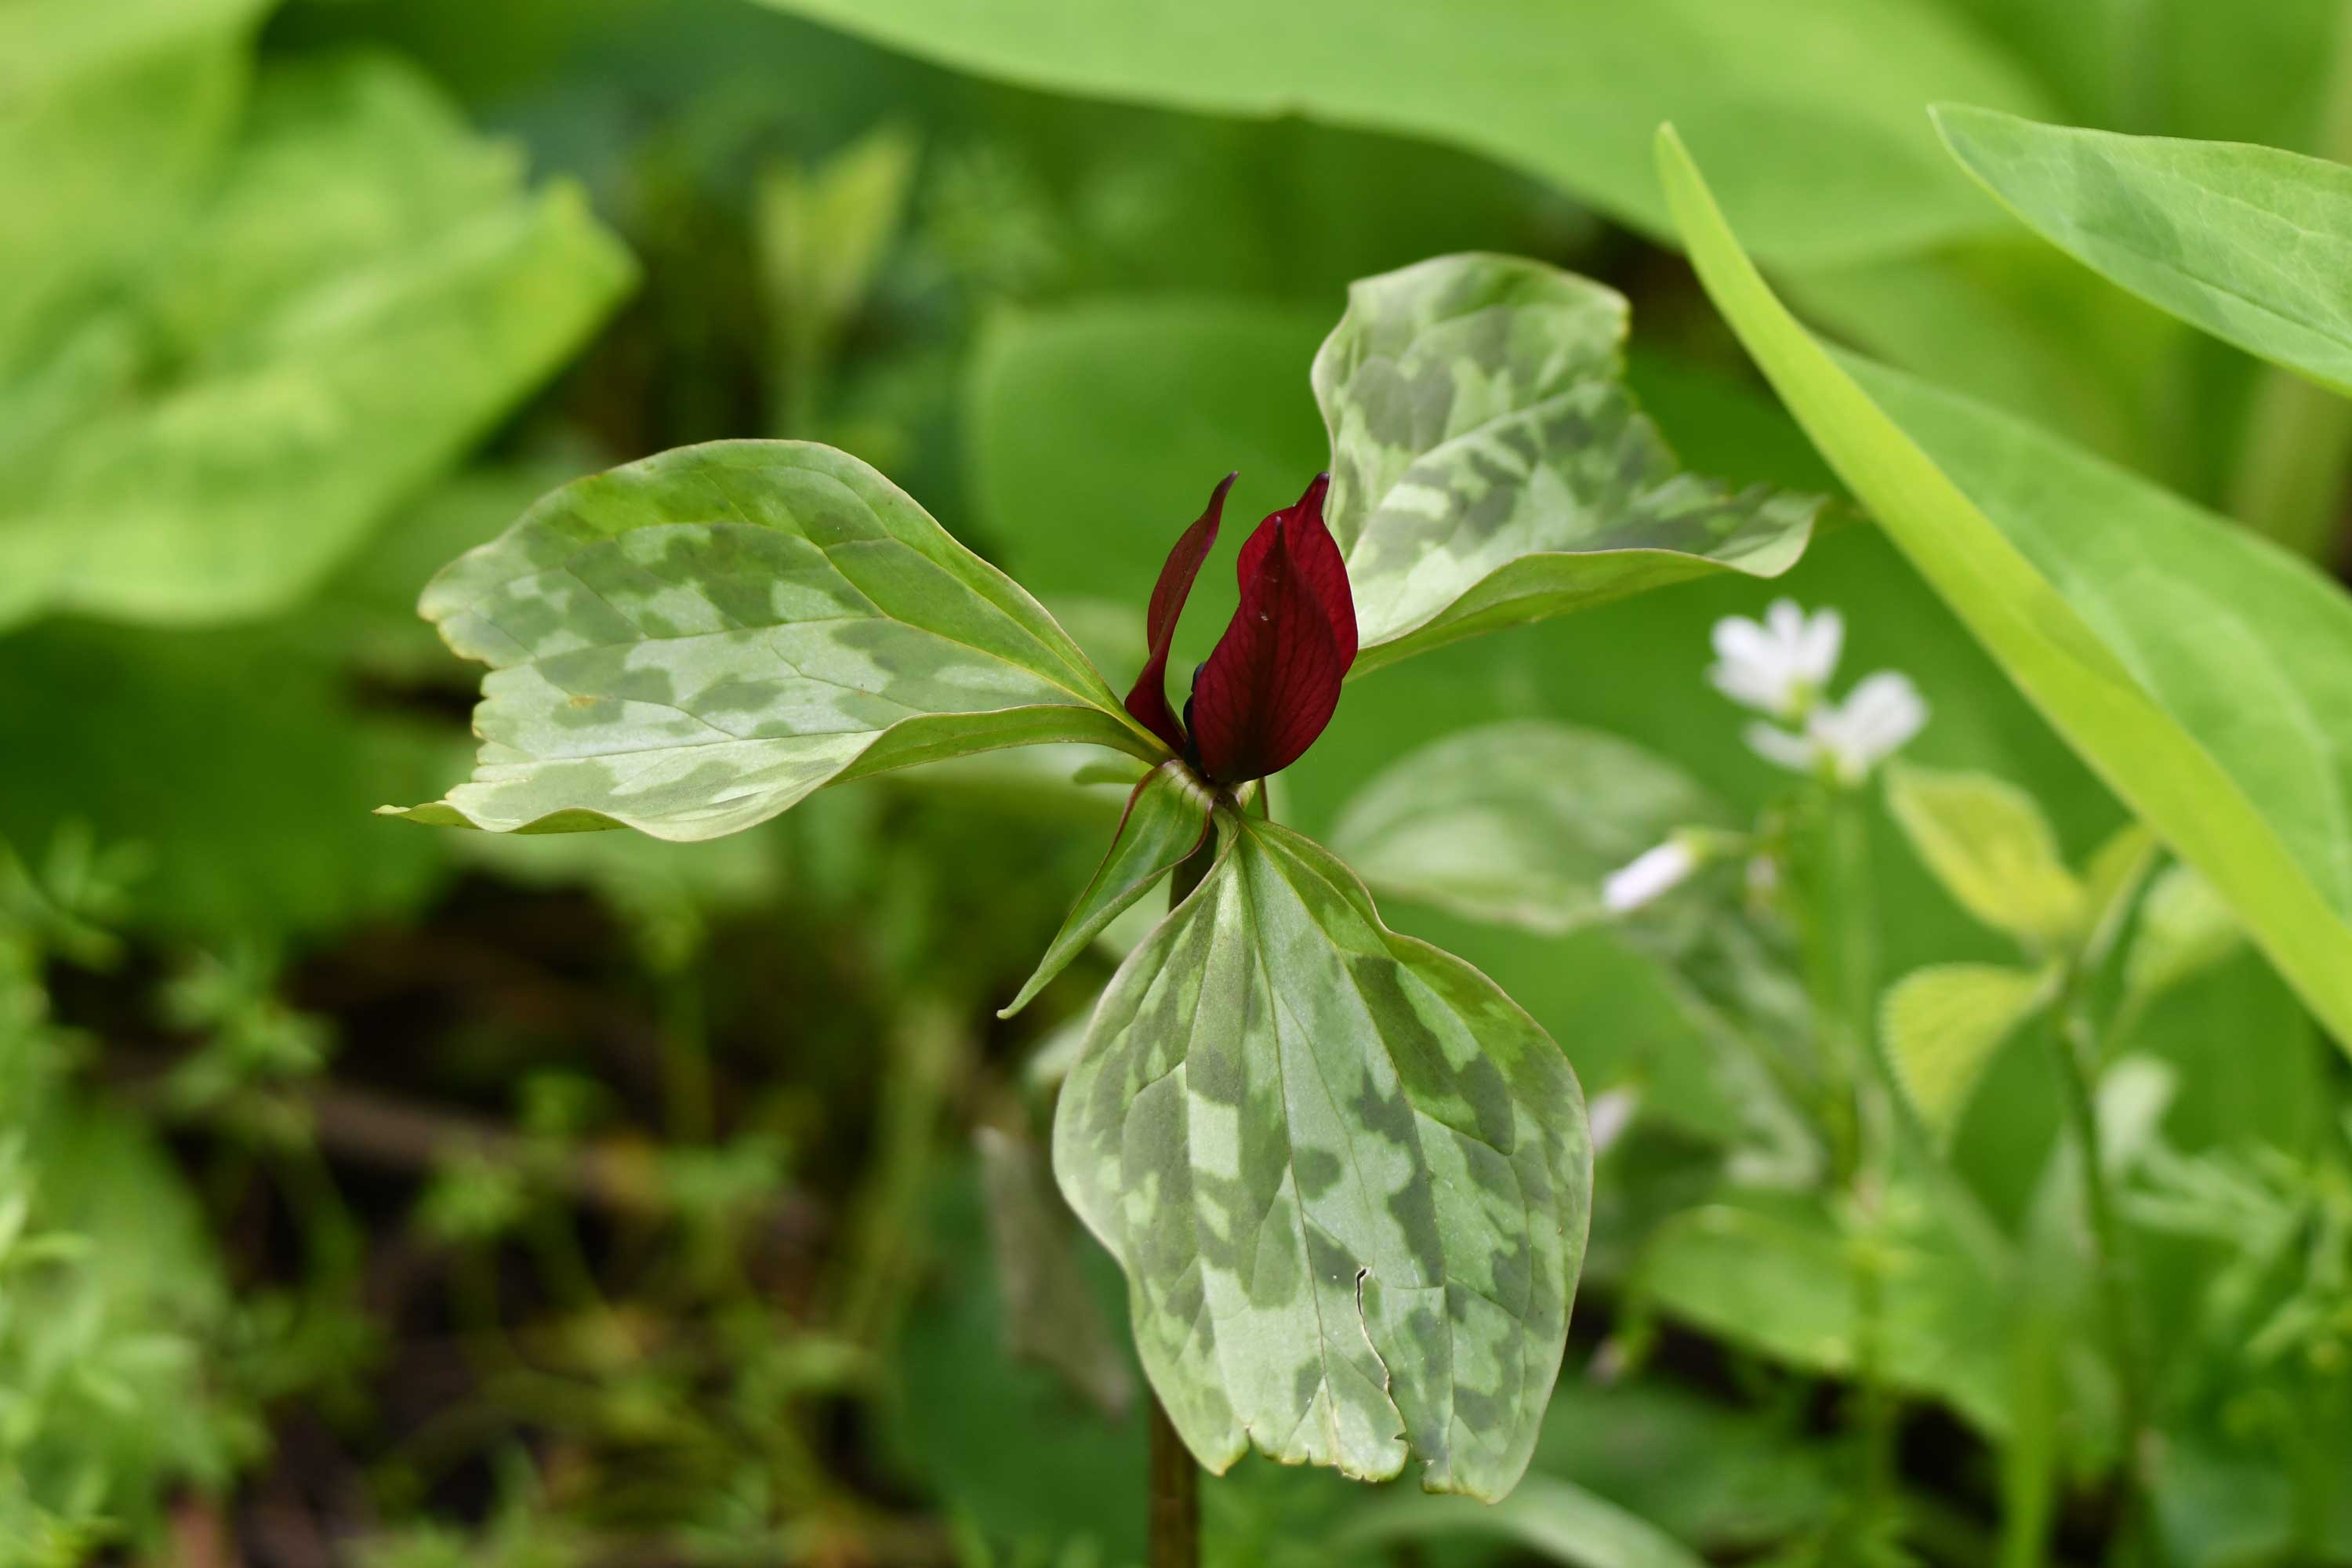 The green leaves and maroon bloom of prairie trillium.